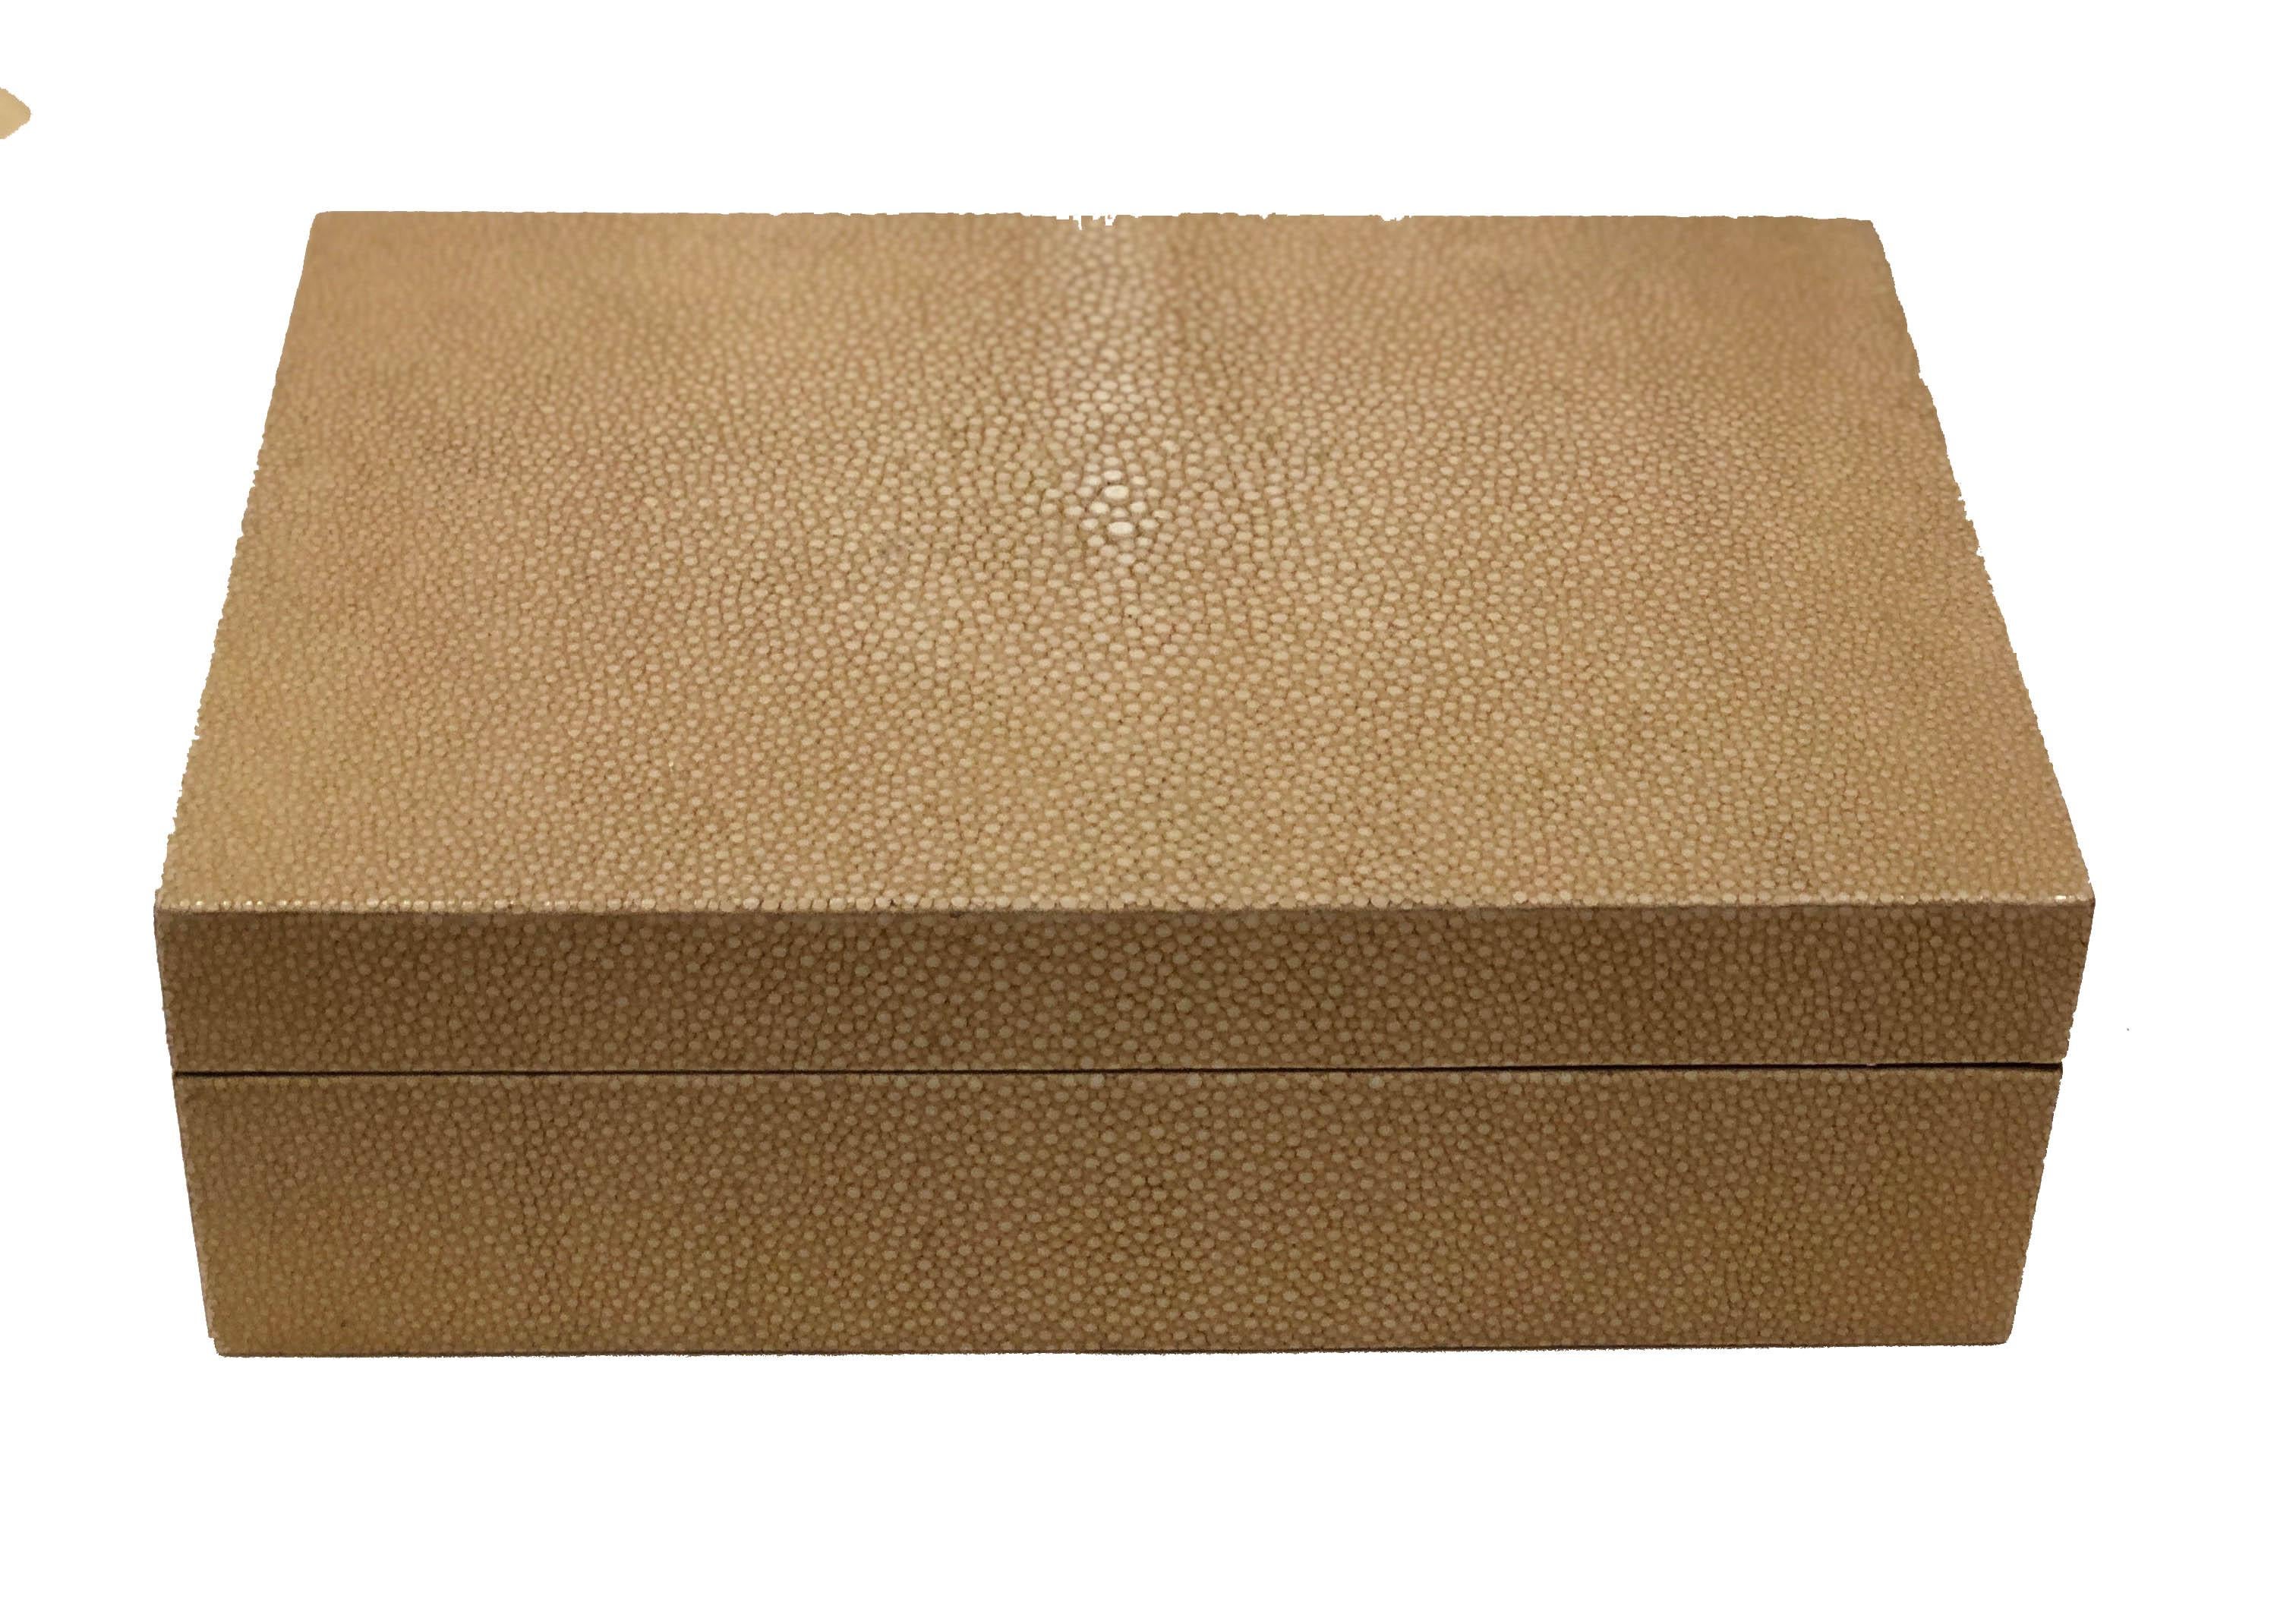 Contemporary rectangular beige shagreen box with a hinged lid and black suede interior (Made in Italy).